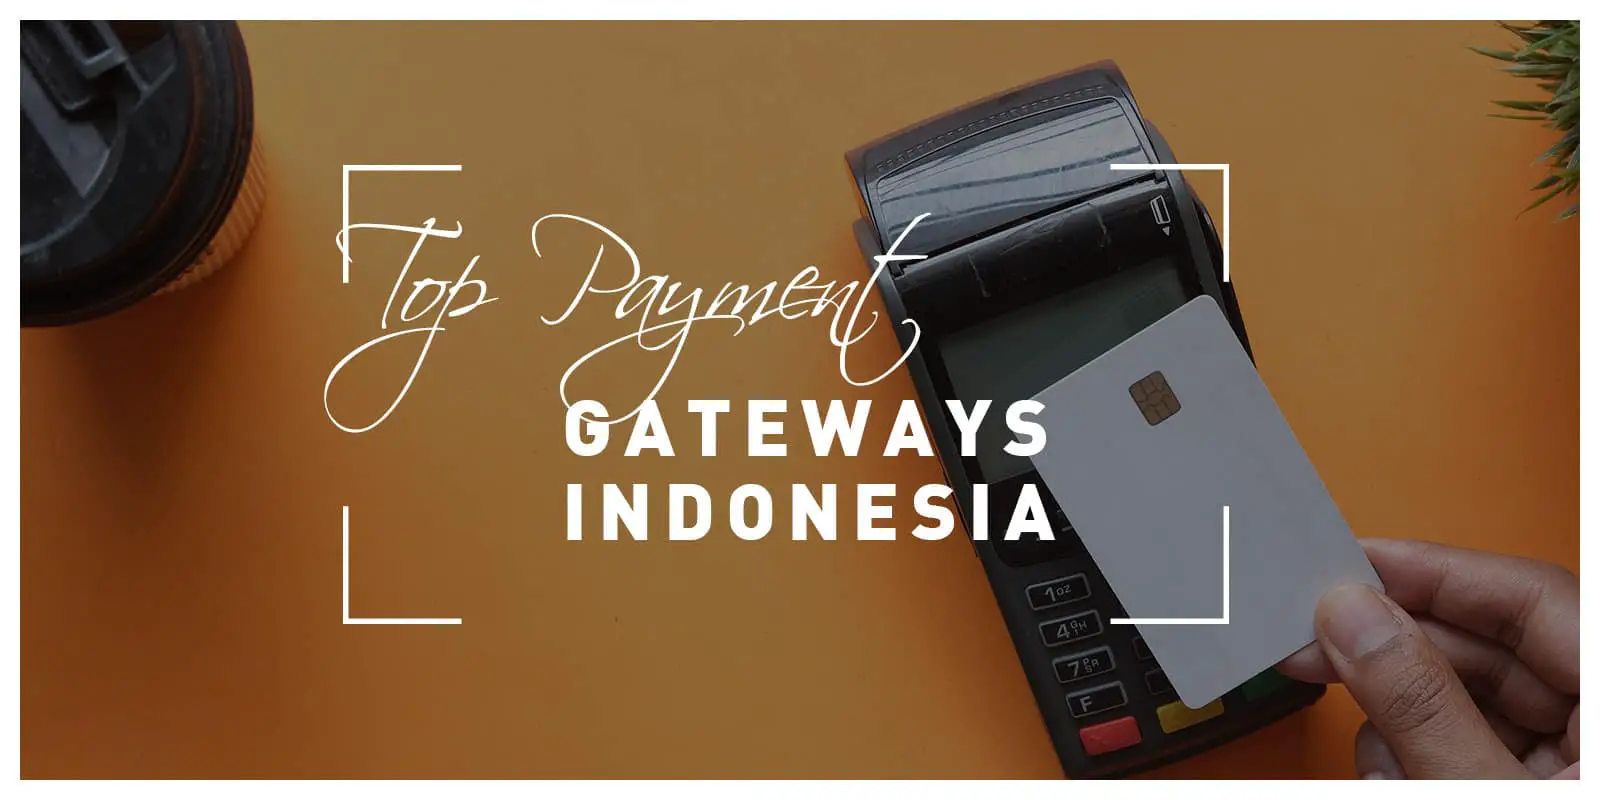 Top Payment Gateways in Indonesia